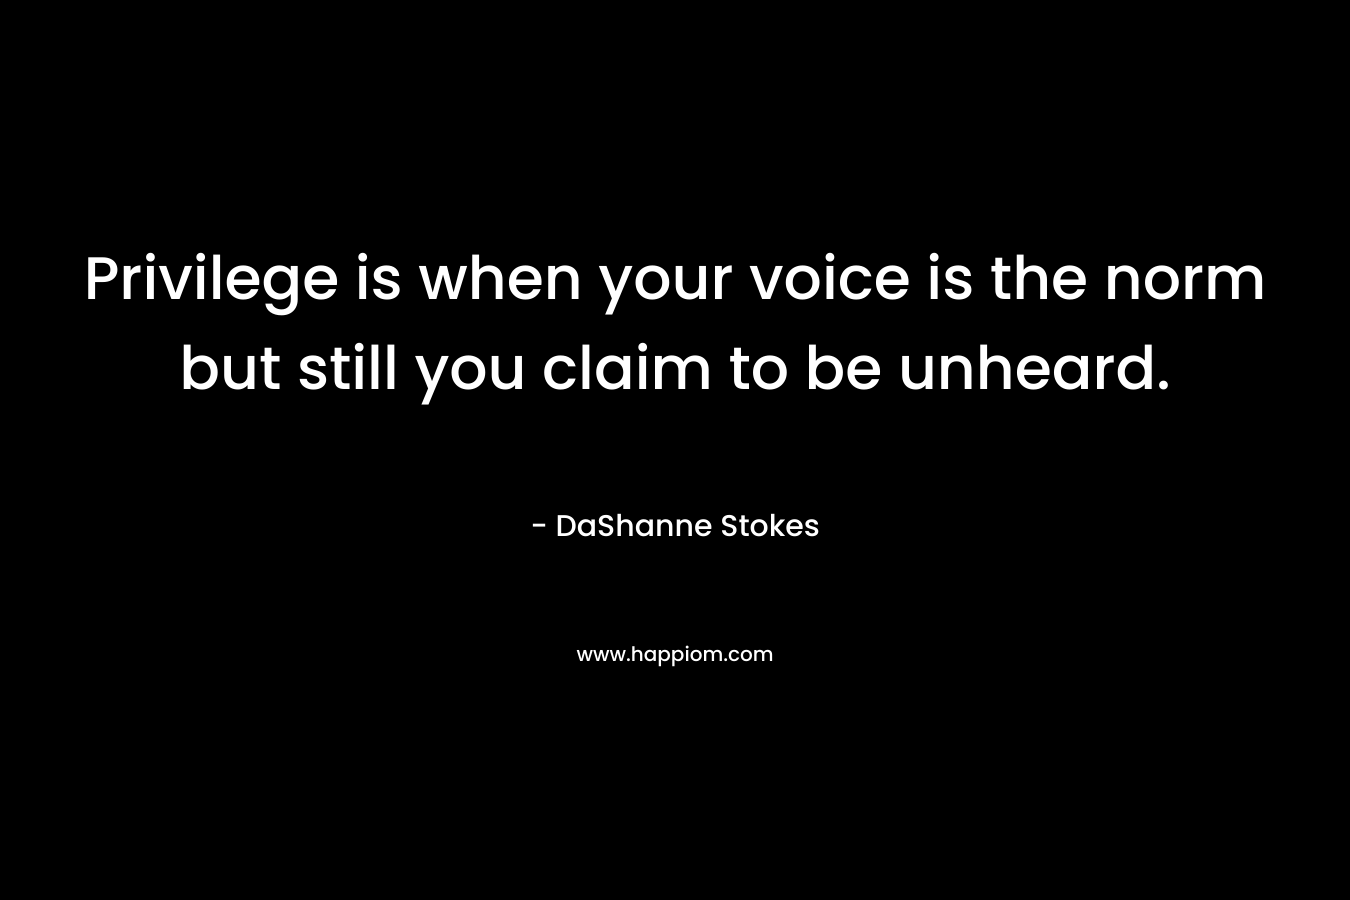 Privilege is when your voice is the norm but still you claim to be unheard.